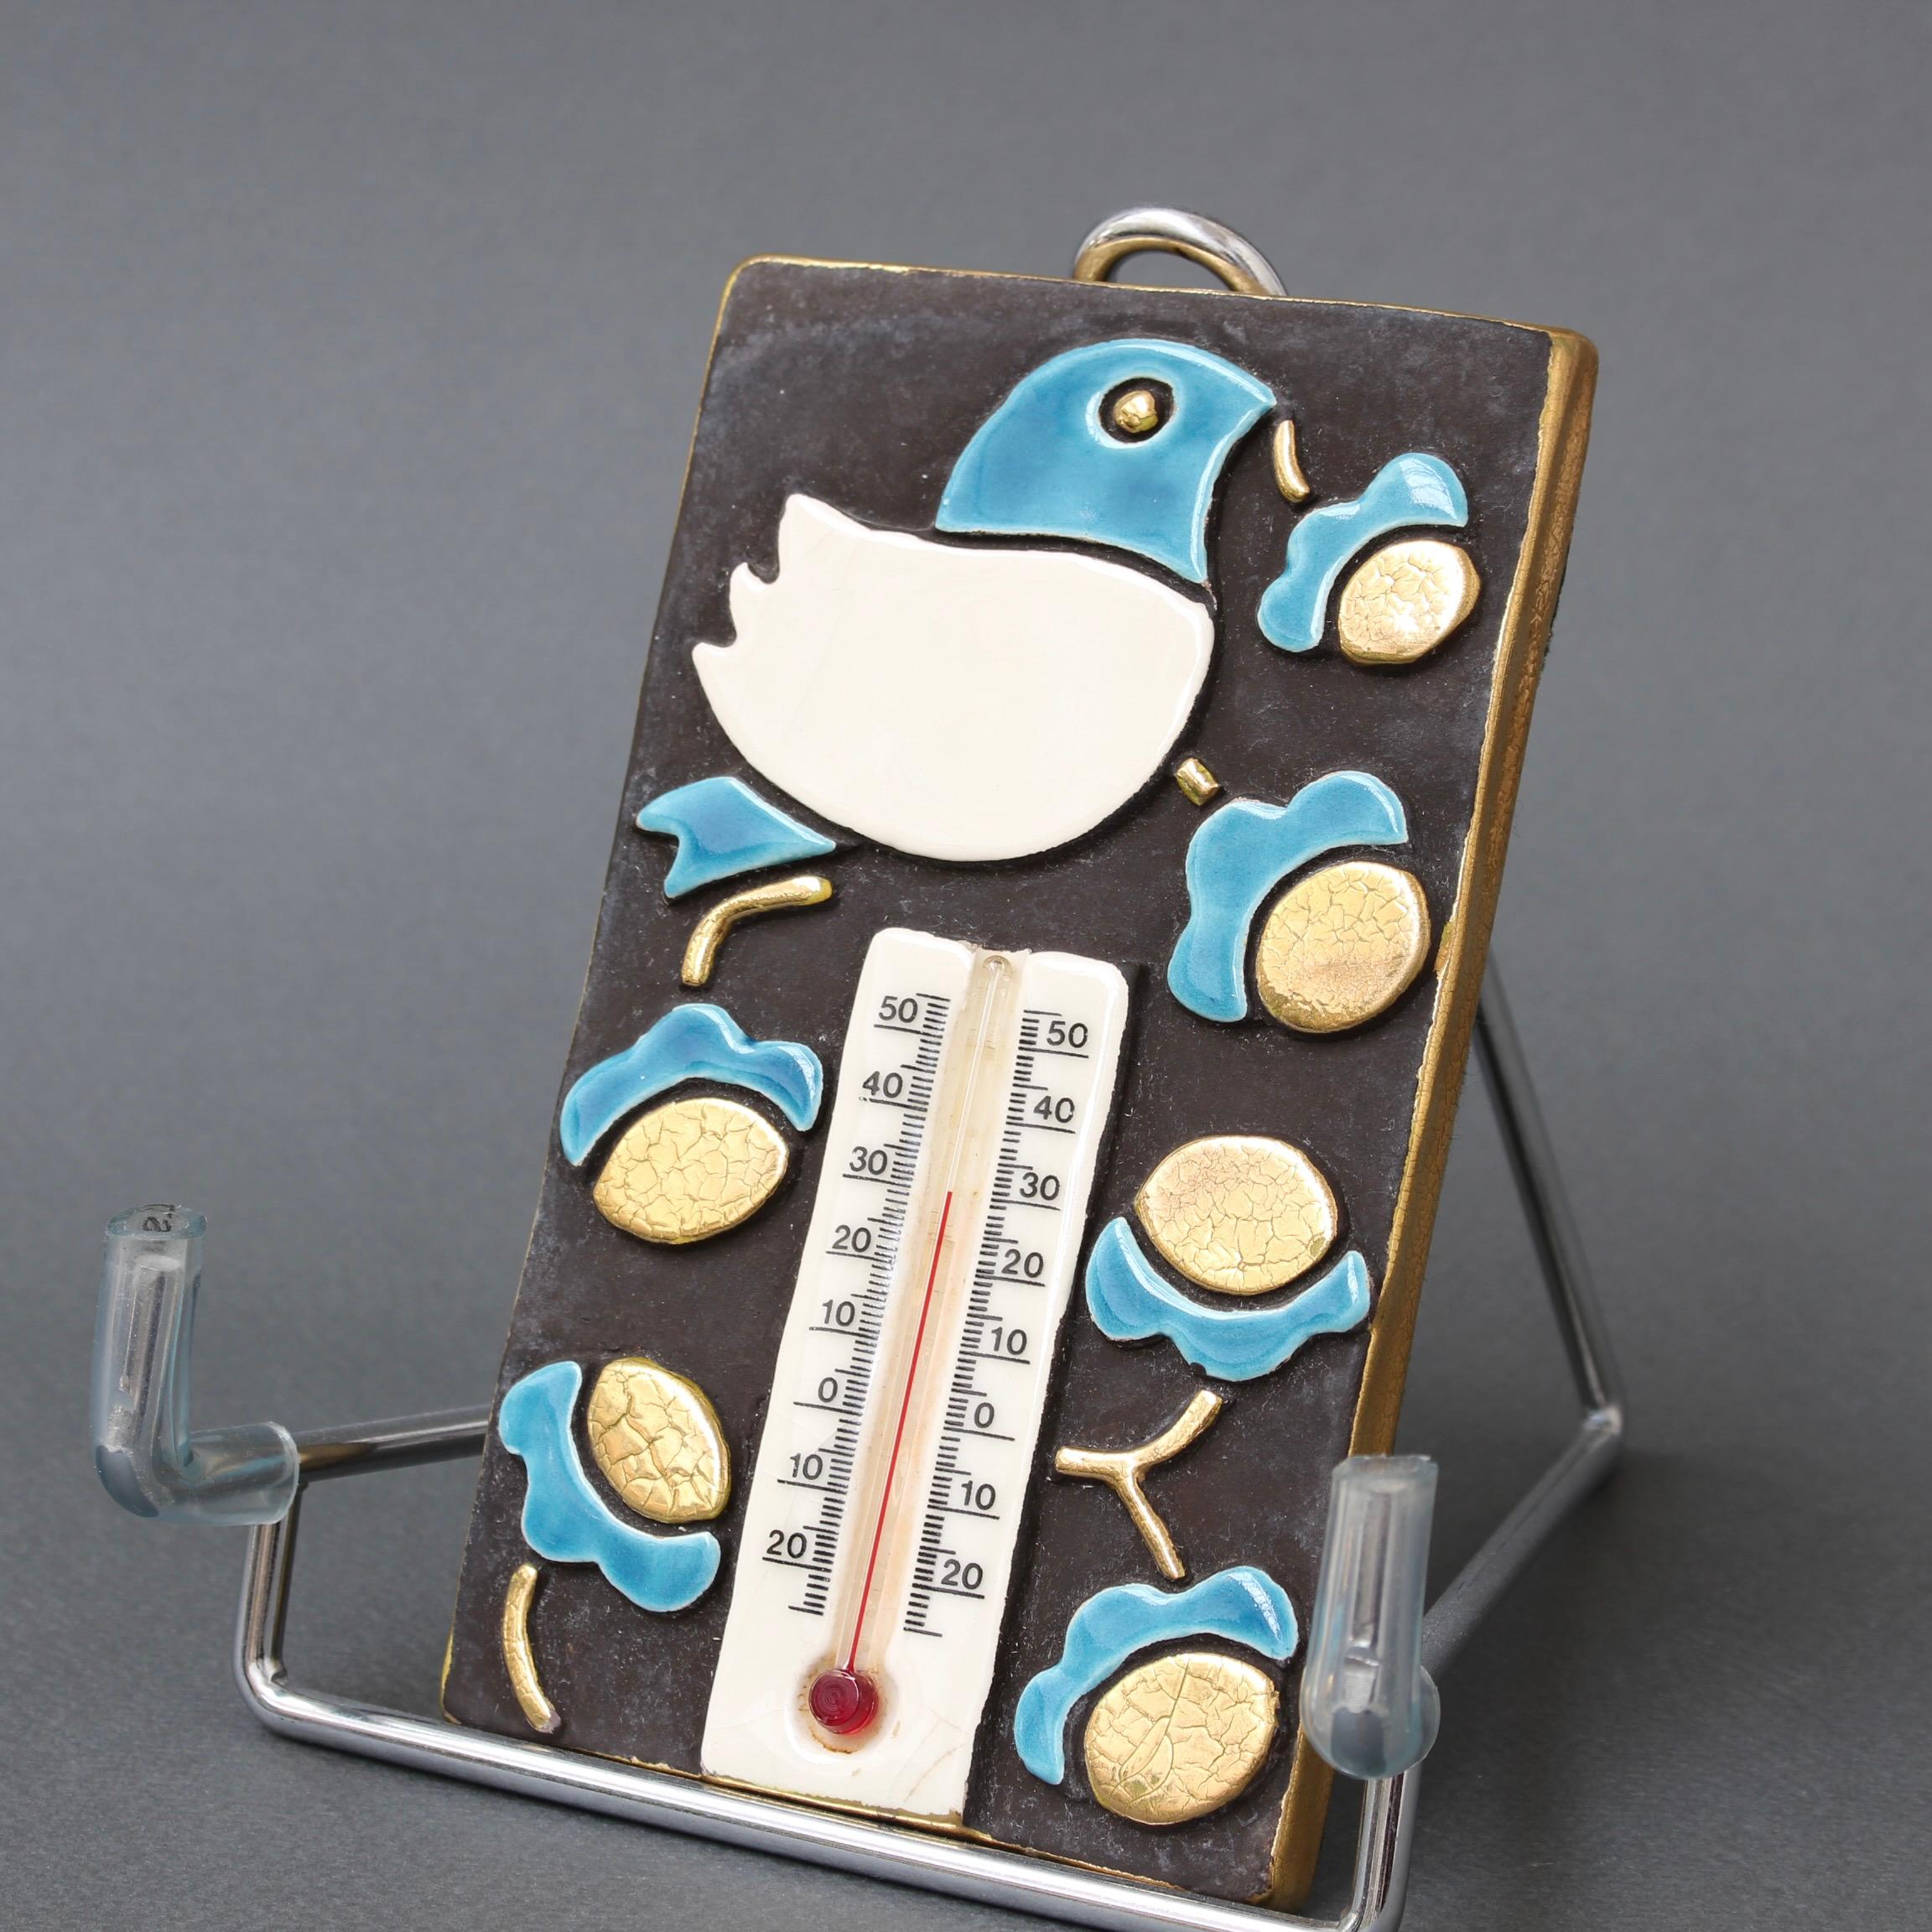 Decorative, French vintage ceramic thermometer and casing by Mithé Espect (circa 1960s). A delightful piece with stylised bird and flower blossoms. The rectangular ceramic backdrop for the decor is in chocolate brown with gold craquelure edges. The